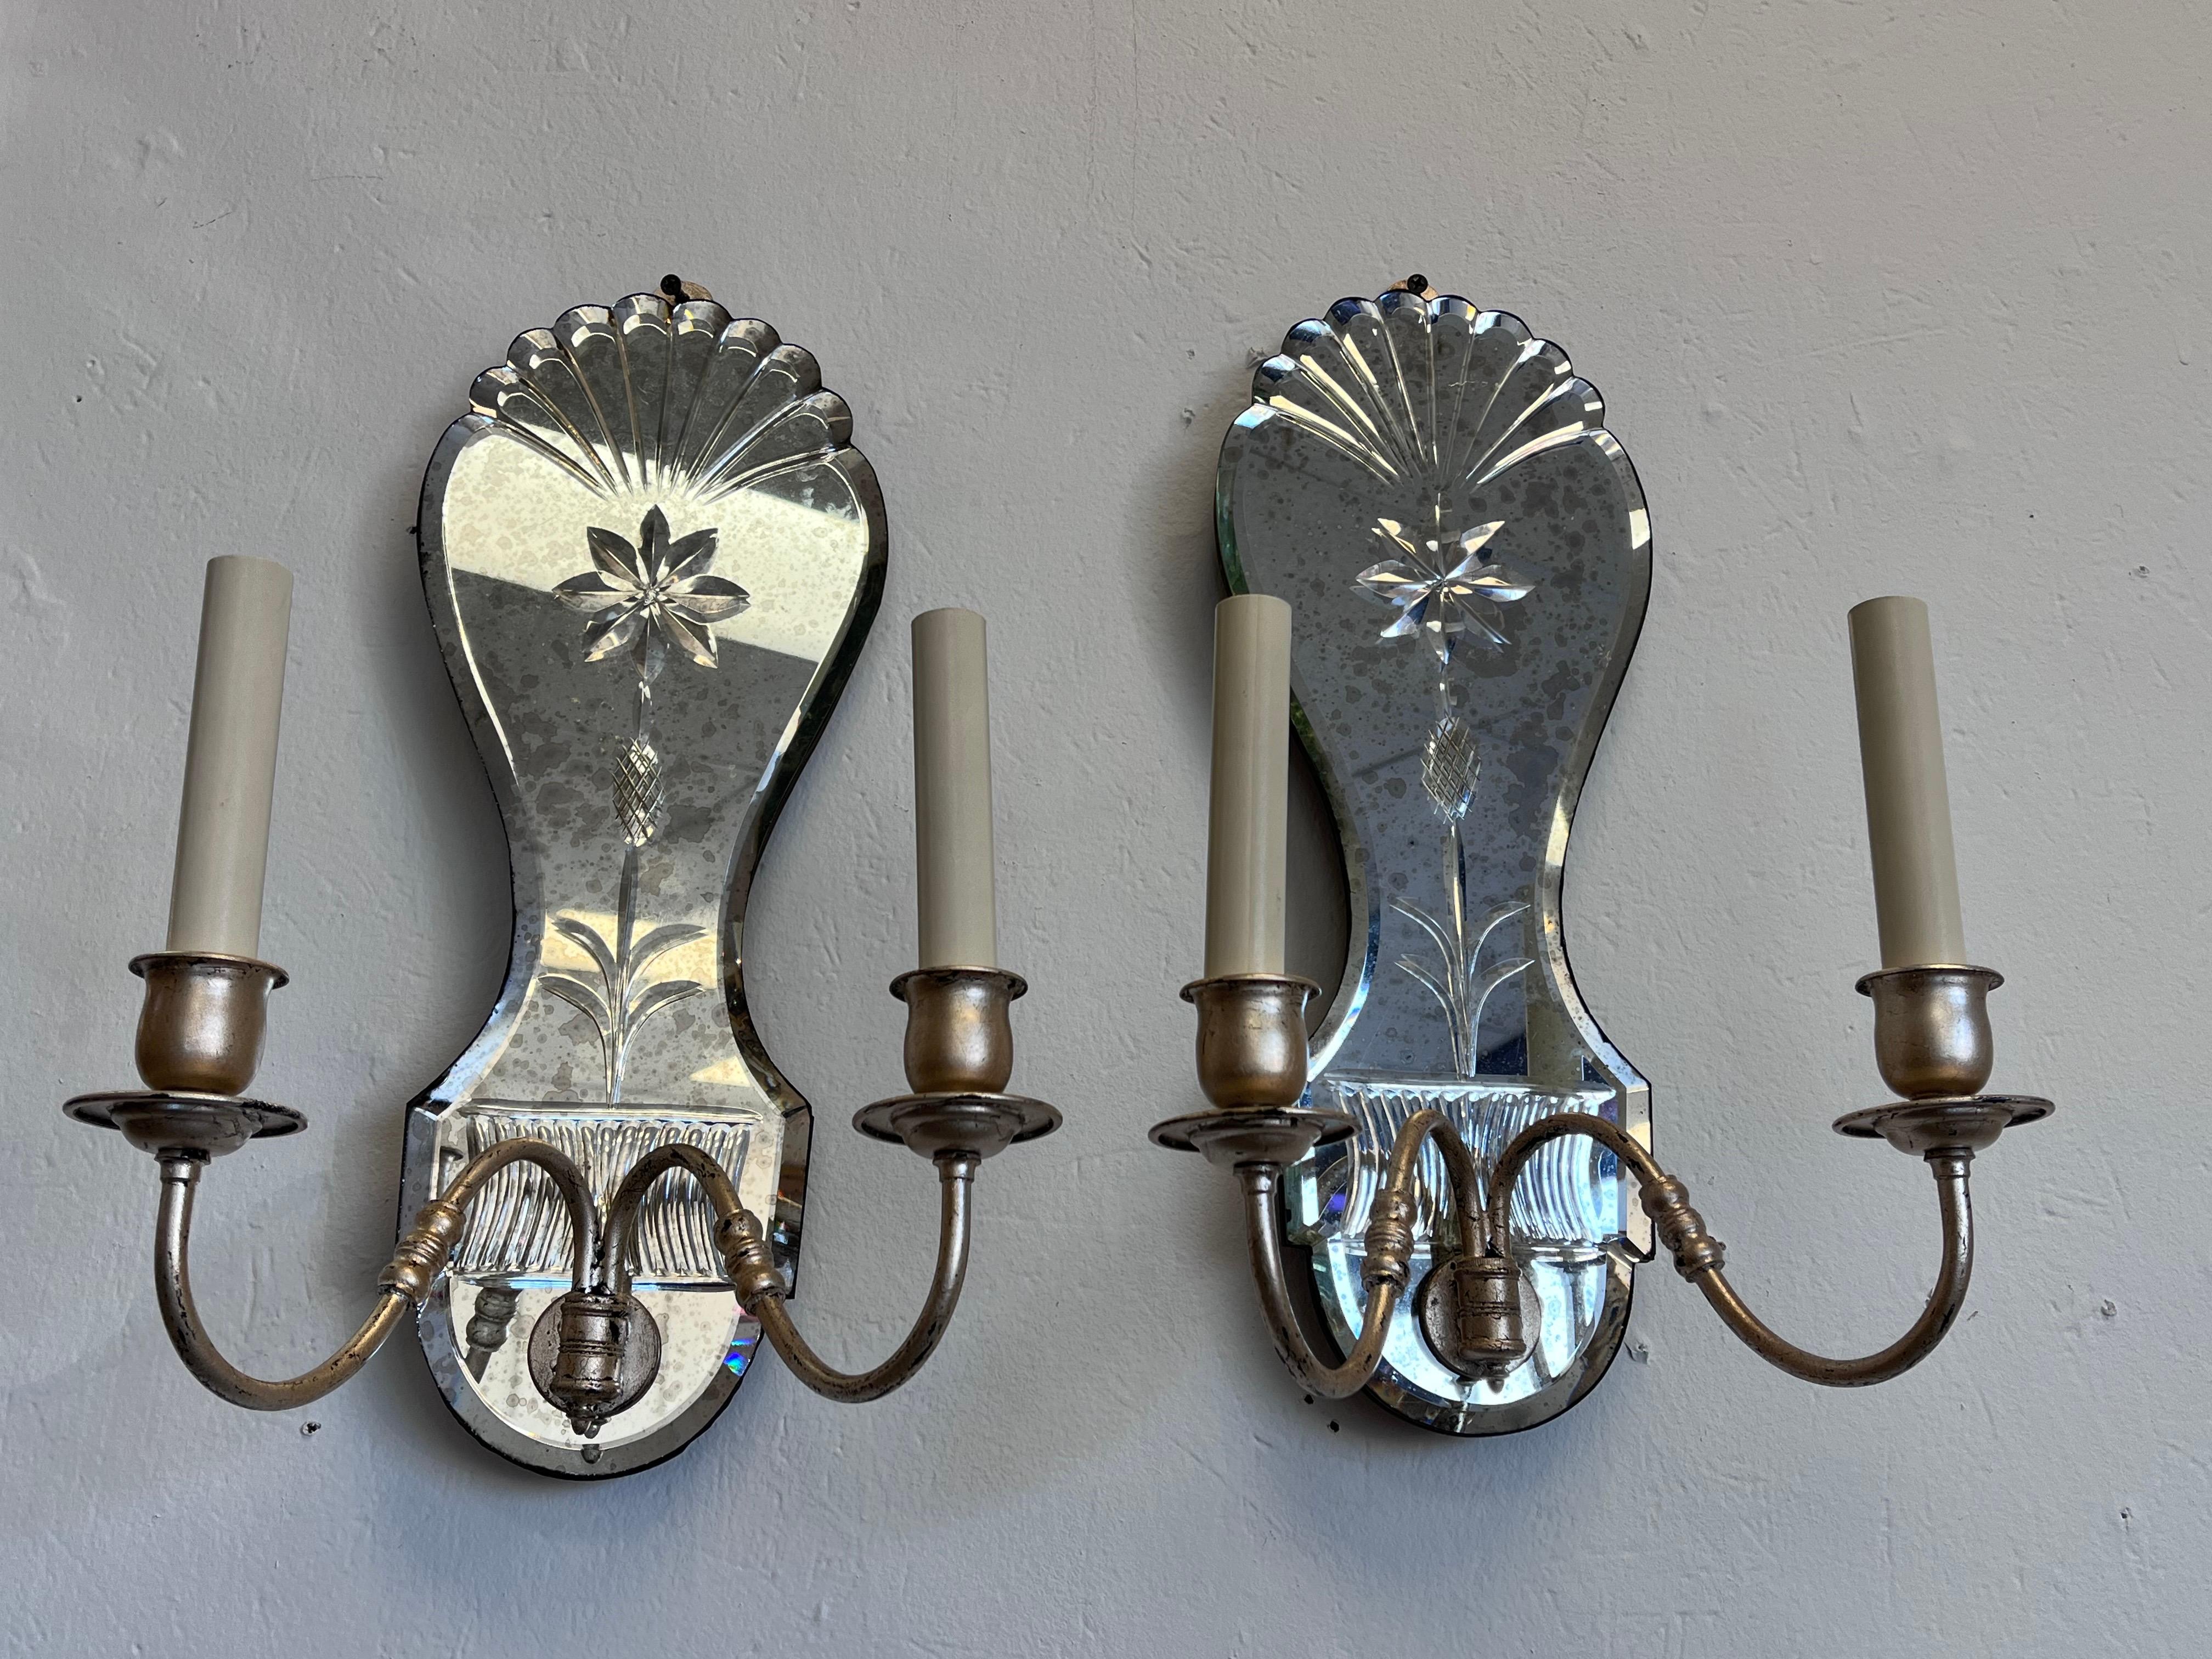 Contemporary Pair of Antiqued Ornately Cut Floral Mirror Silver Gilt Double Arm Wall Sconces